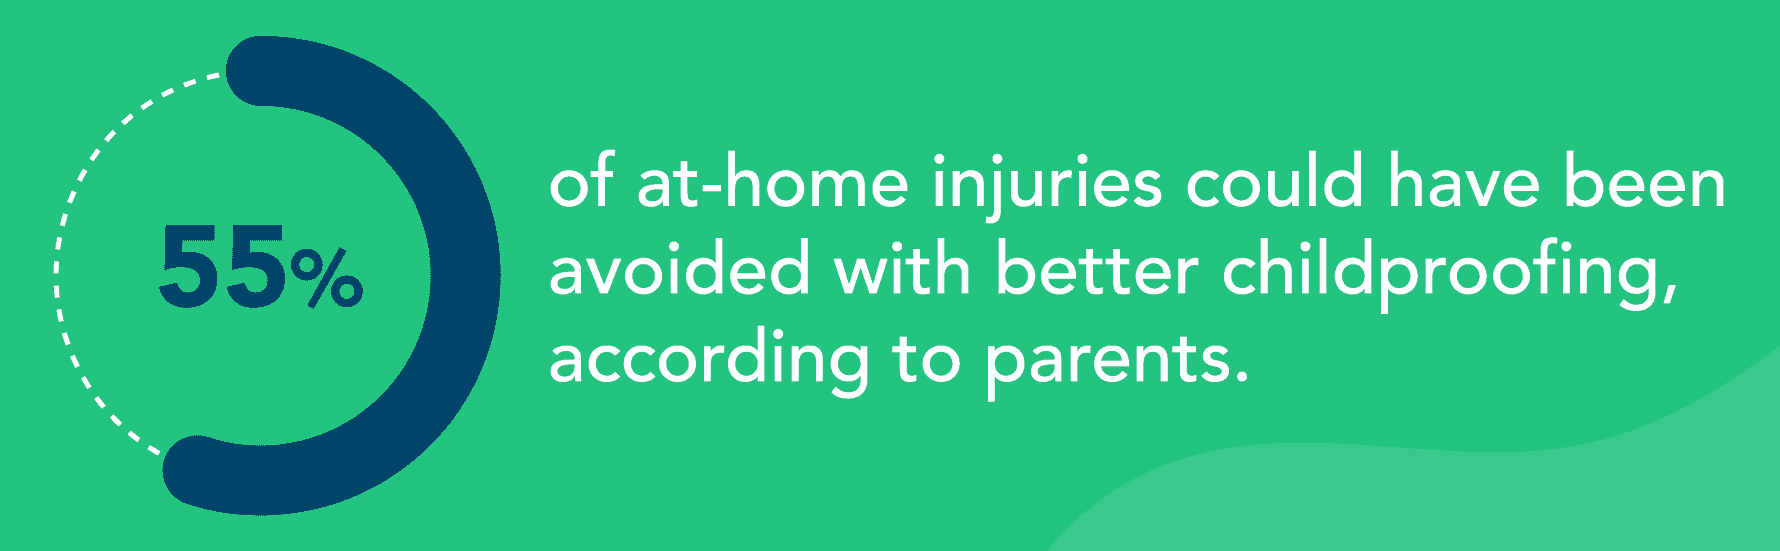 55% of at-home injuries could have been avoided with better childproofing, according to parents.